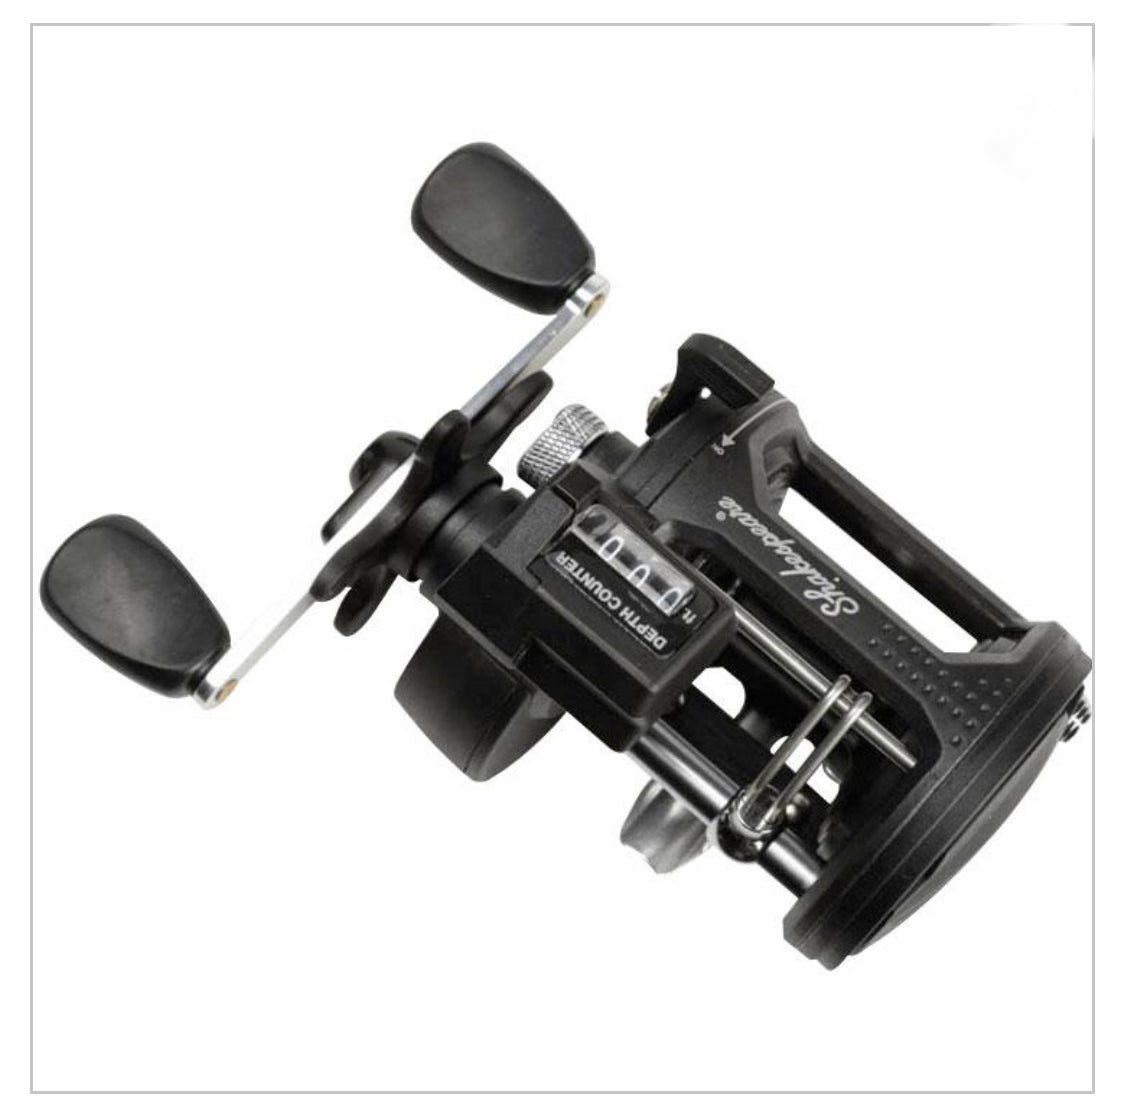 http://pro-team-guides-marine-tackle-outlet.myshopify.com/cdn/shop/products/image_e395eb3f-6232-45a6-868d-2d09dd568560_1200x1200.jpg?v=1623348151